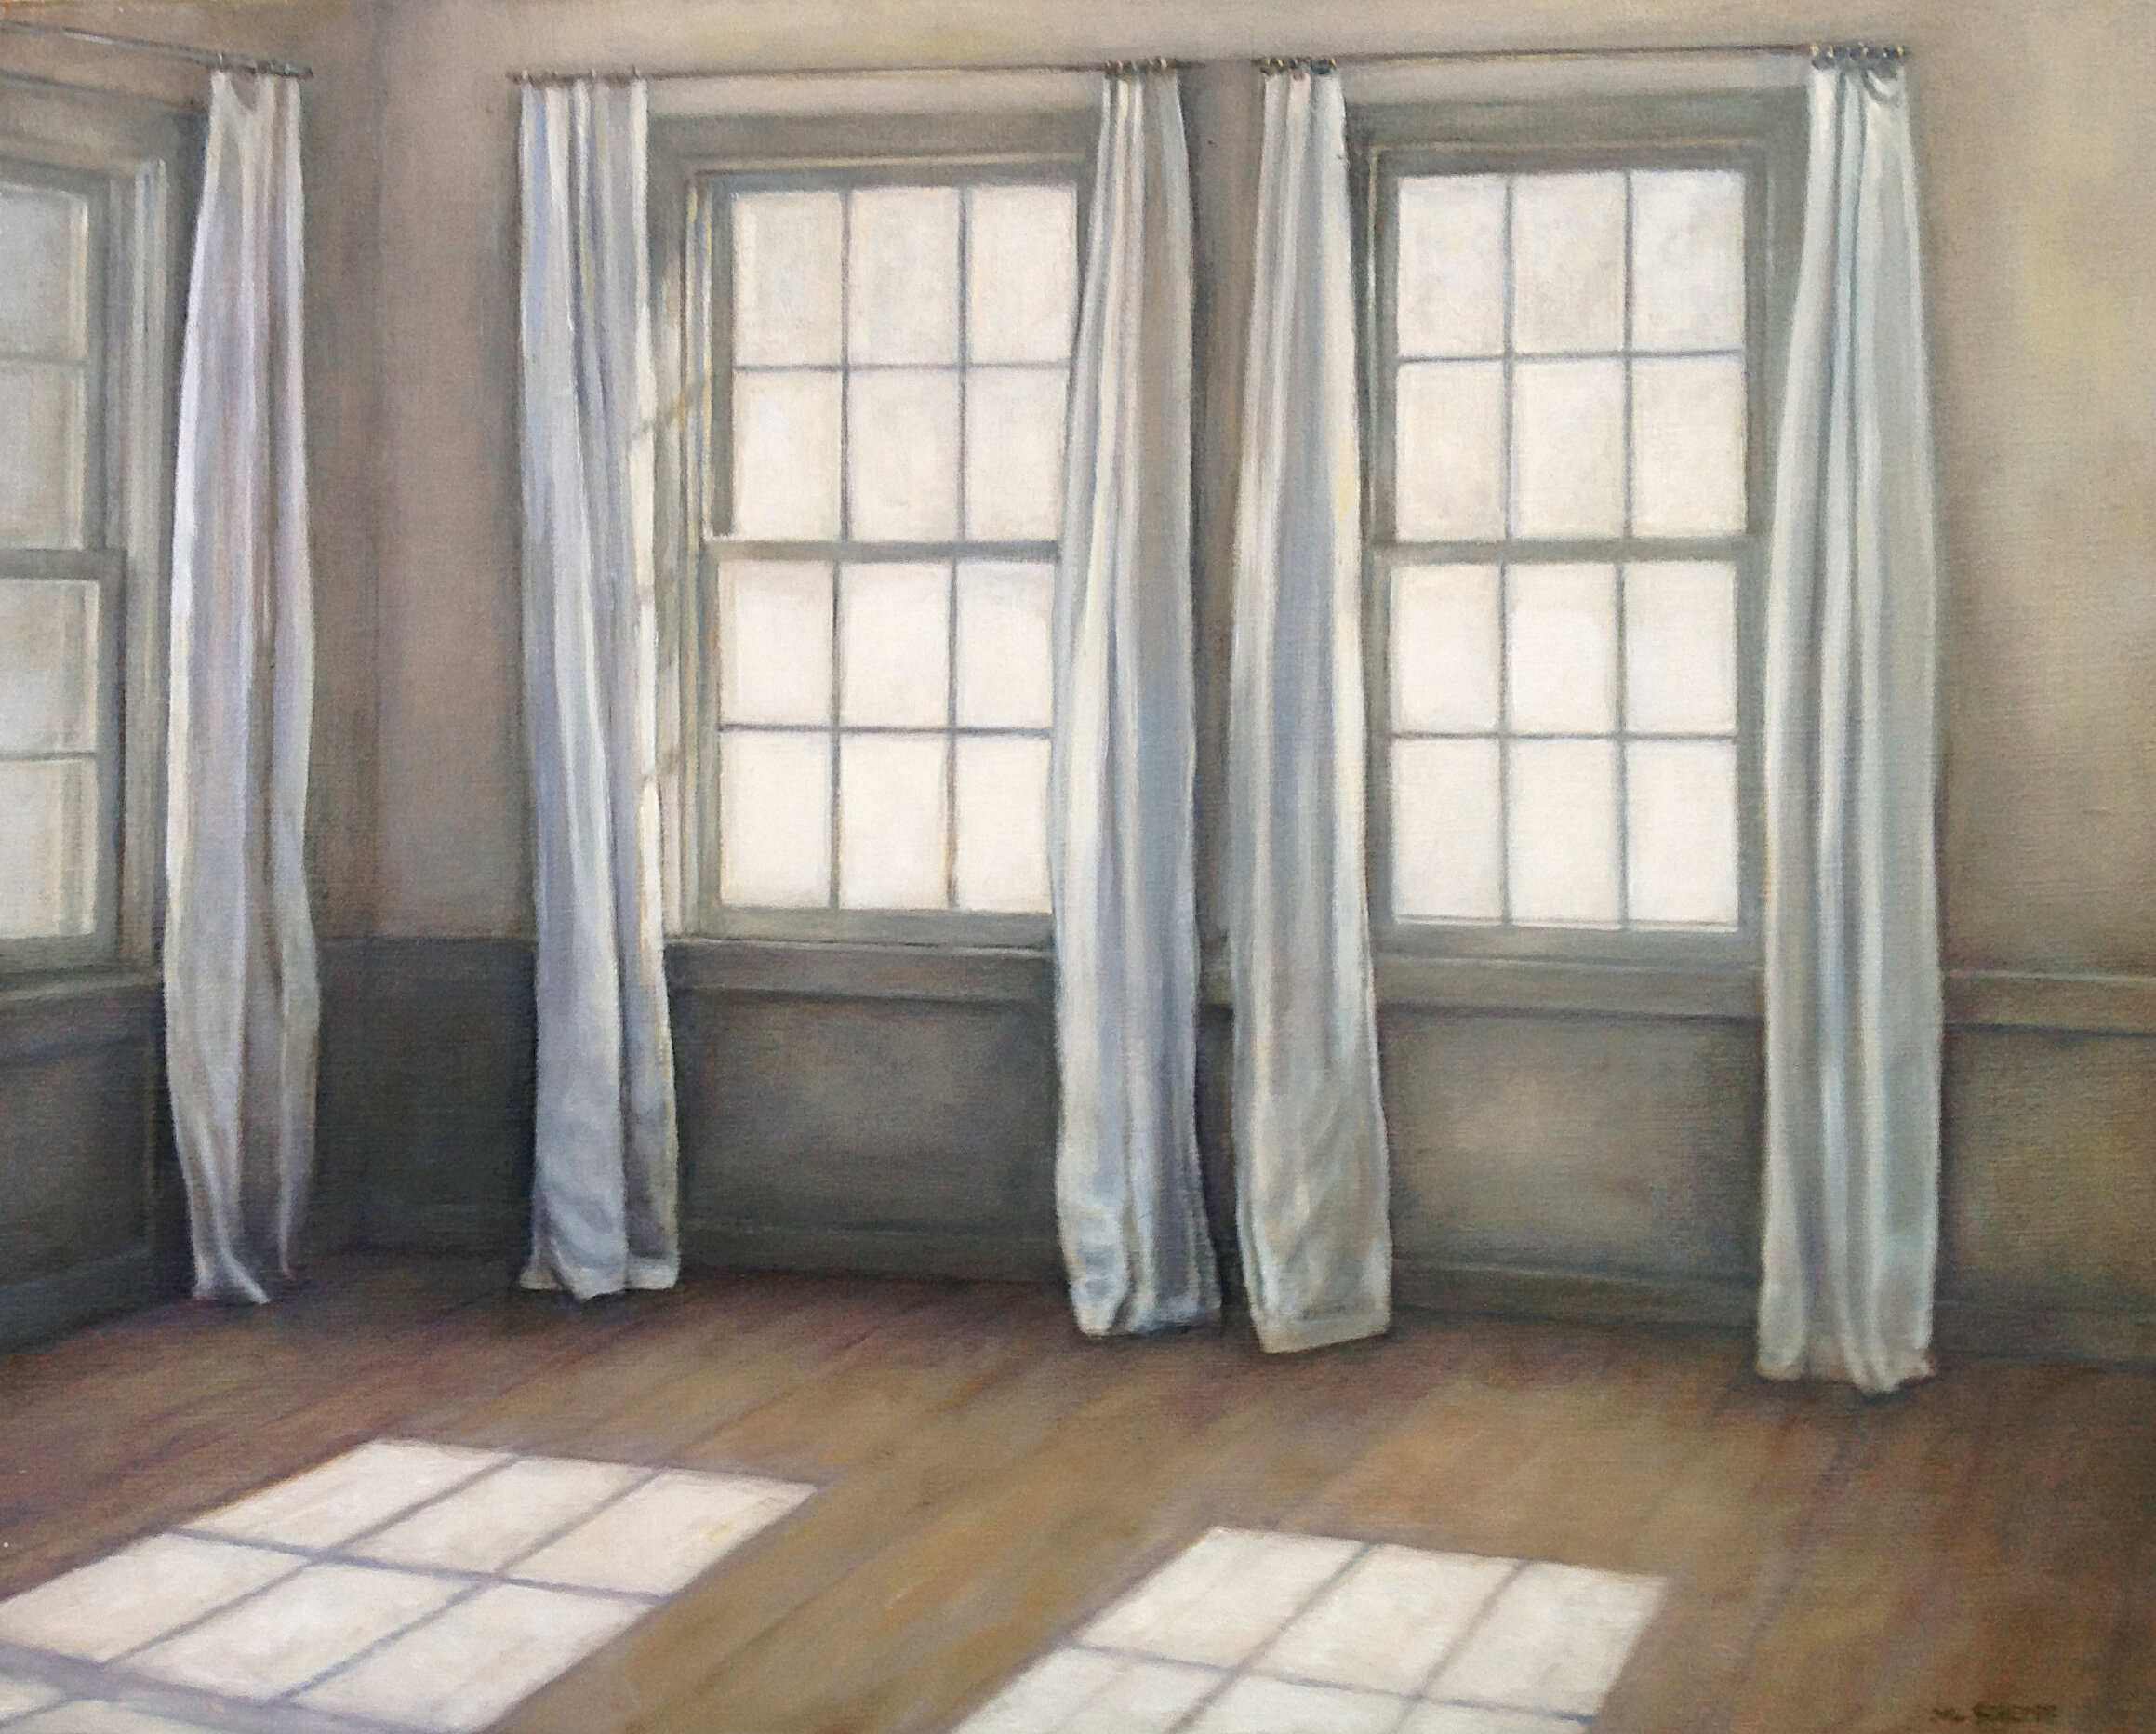  Mary Lou Schempf  Interior with Winter Light,    16” x 20”, oil on linen  (private collection)  